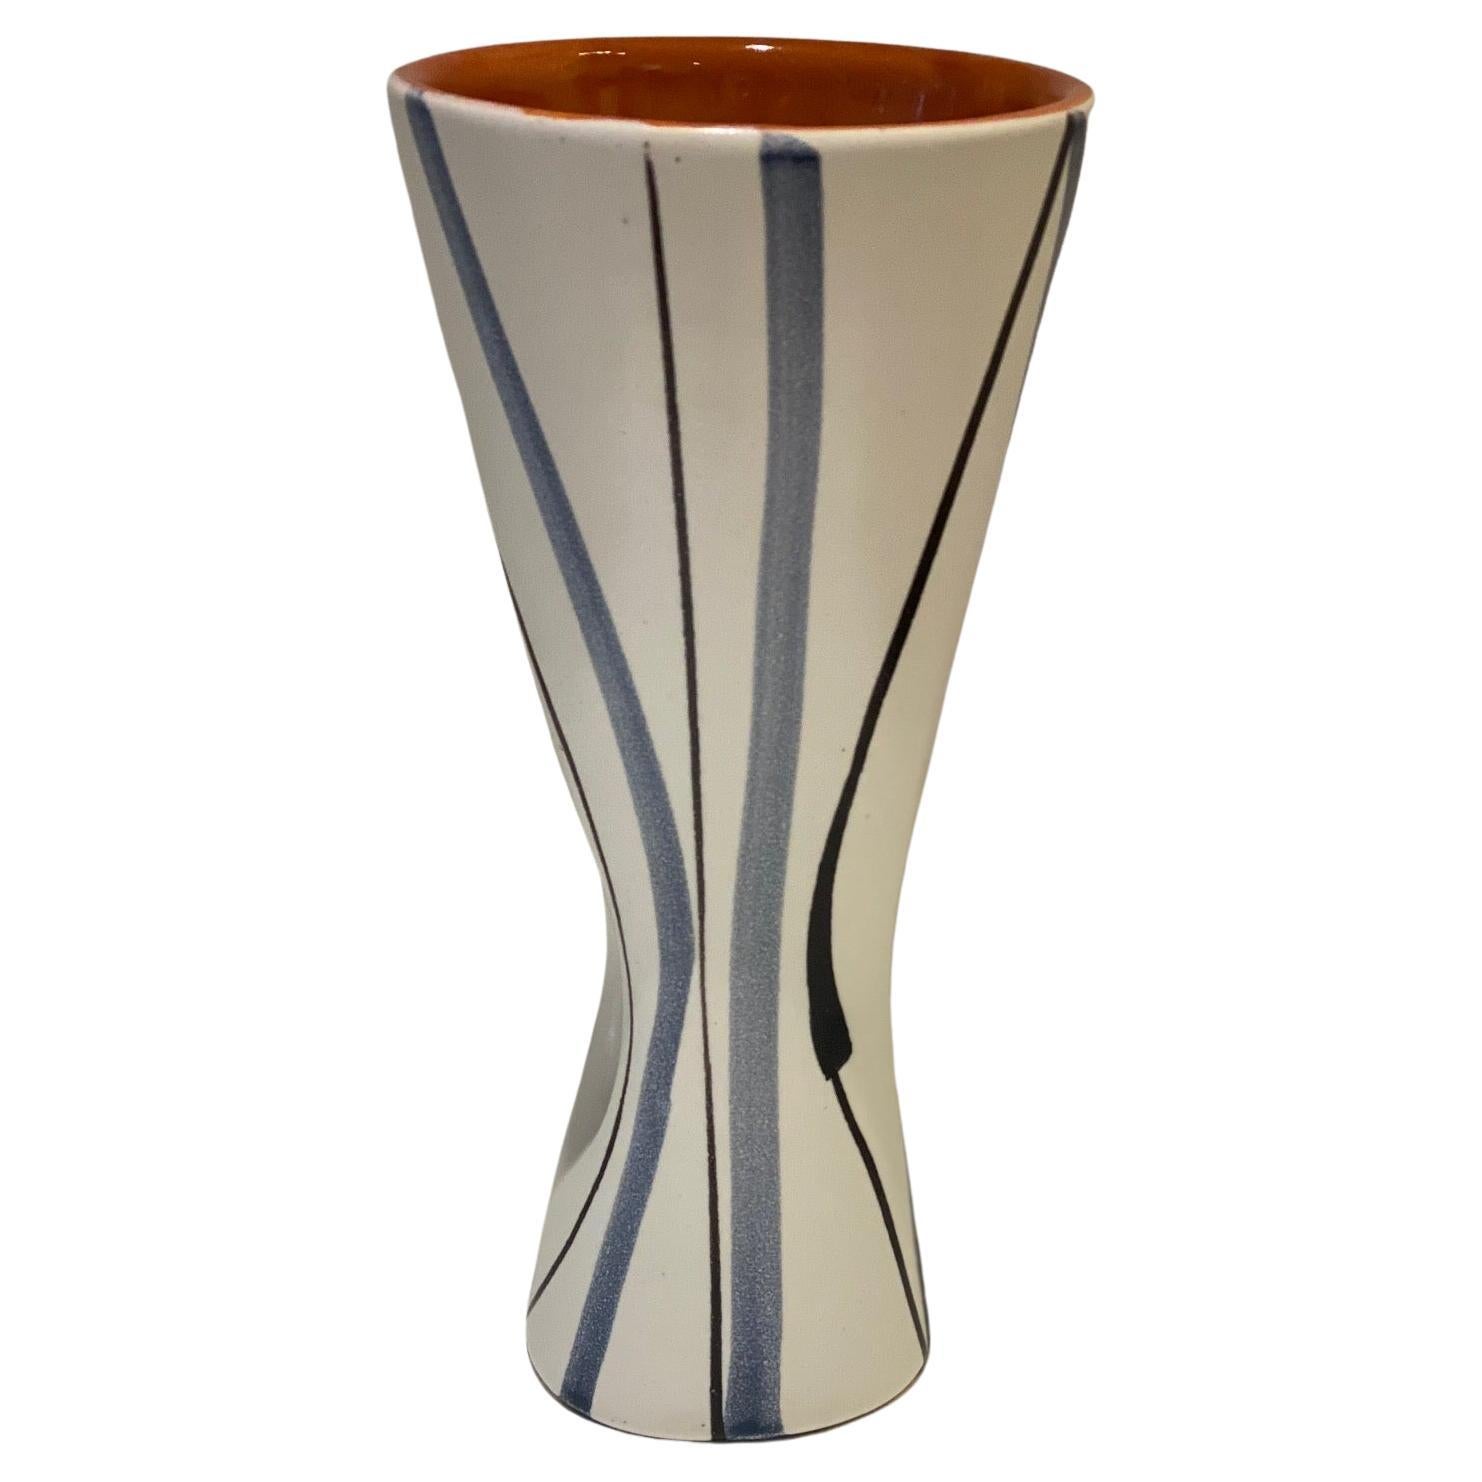 Ceramic Vase Signed by Roger Capron Vallauris, 1950s